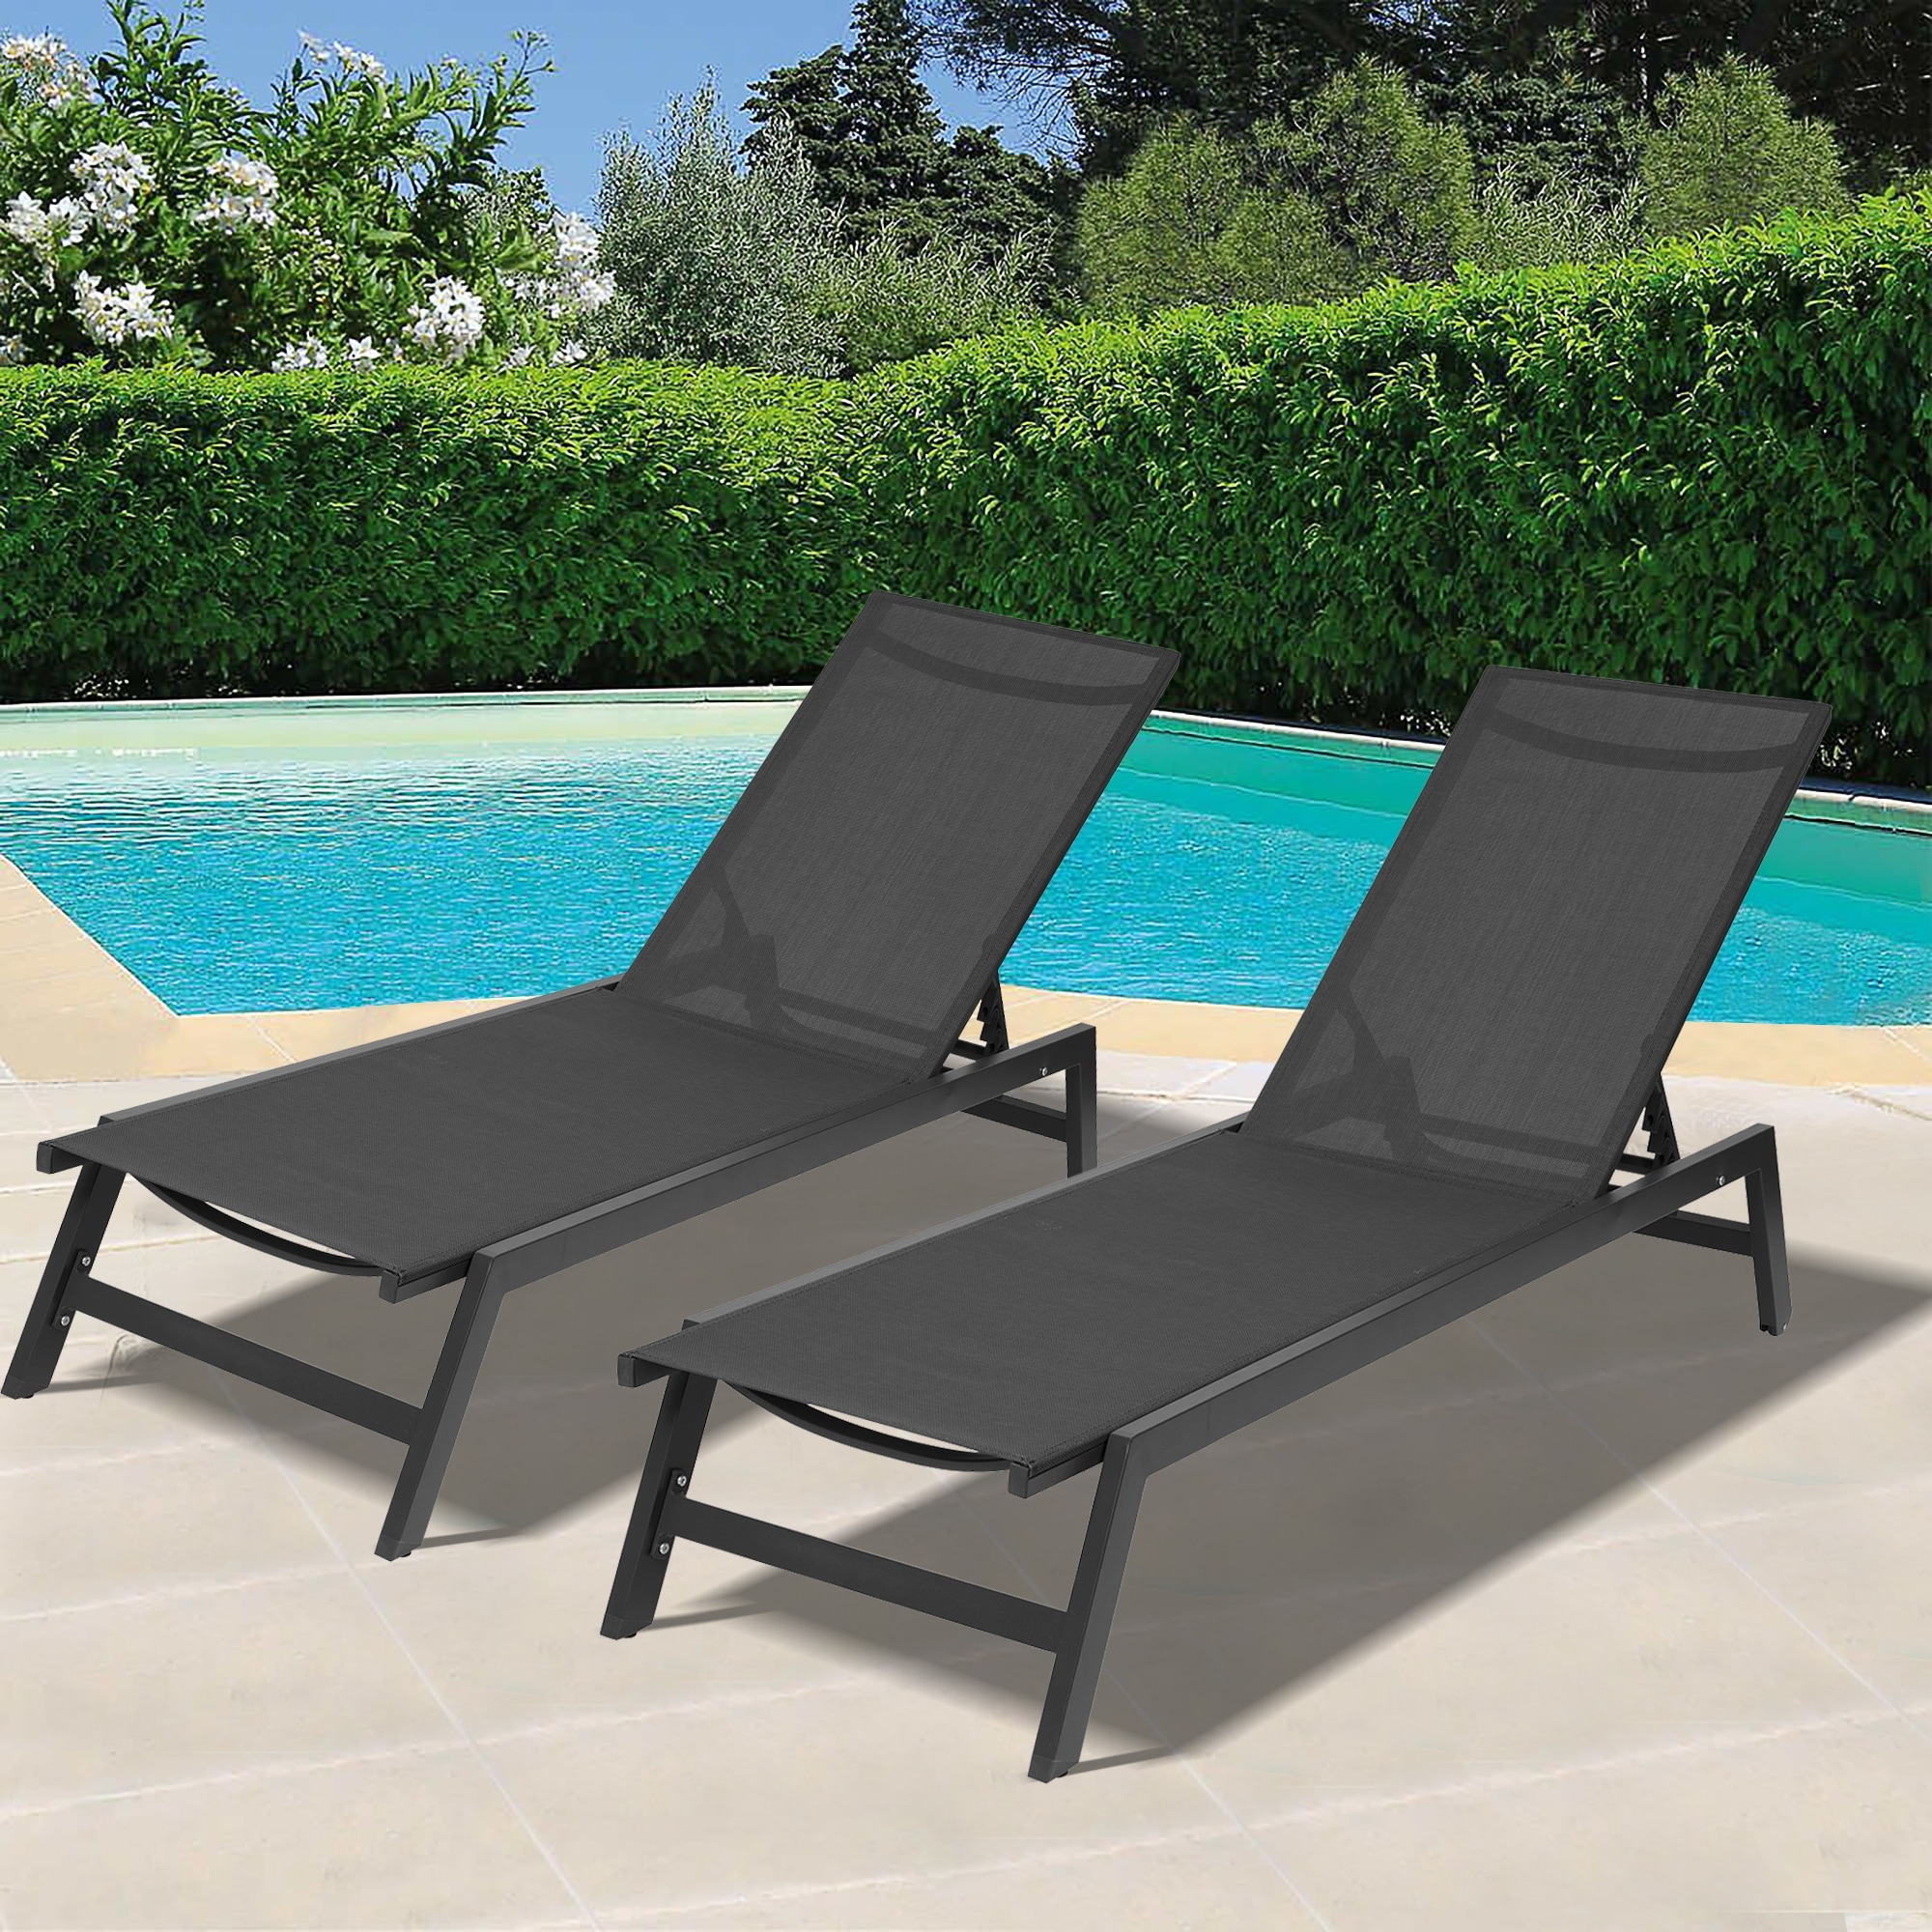 2-piece 5-position Adjustable Aluminum Recliner Set For Outdoor Patio  Beach  Or Pool  All-weather Furniture